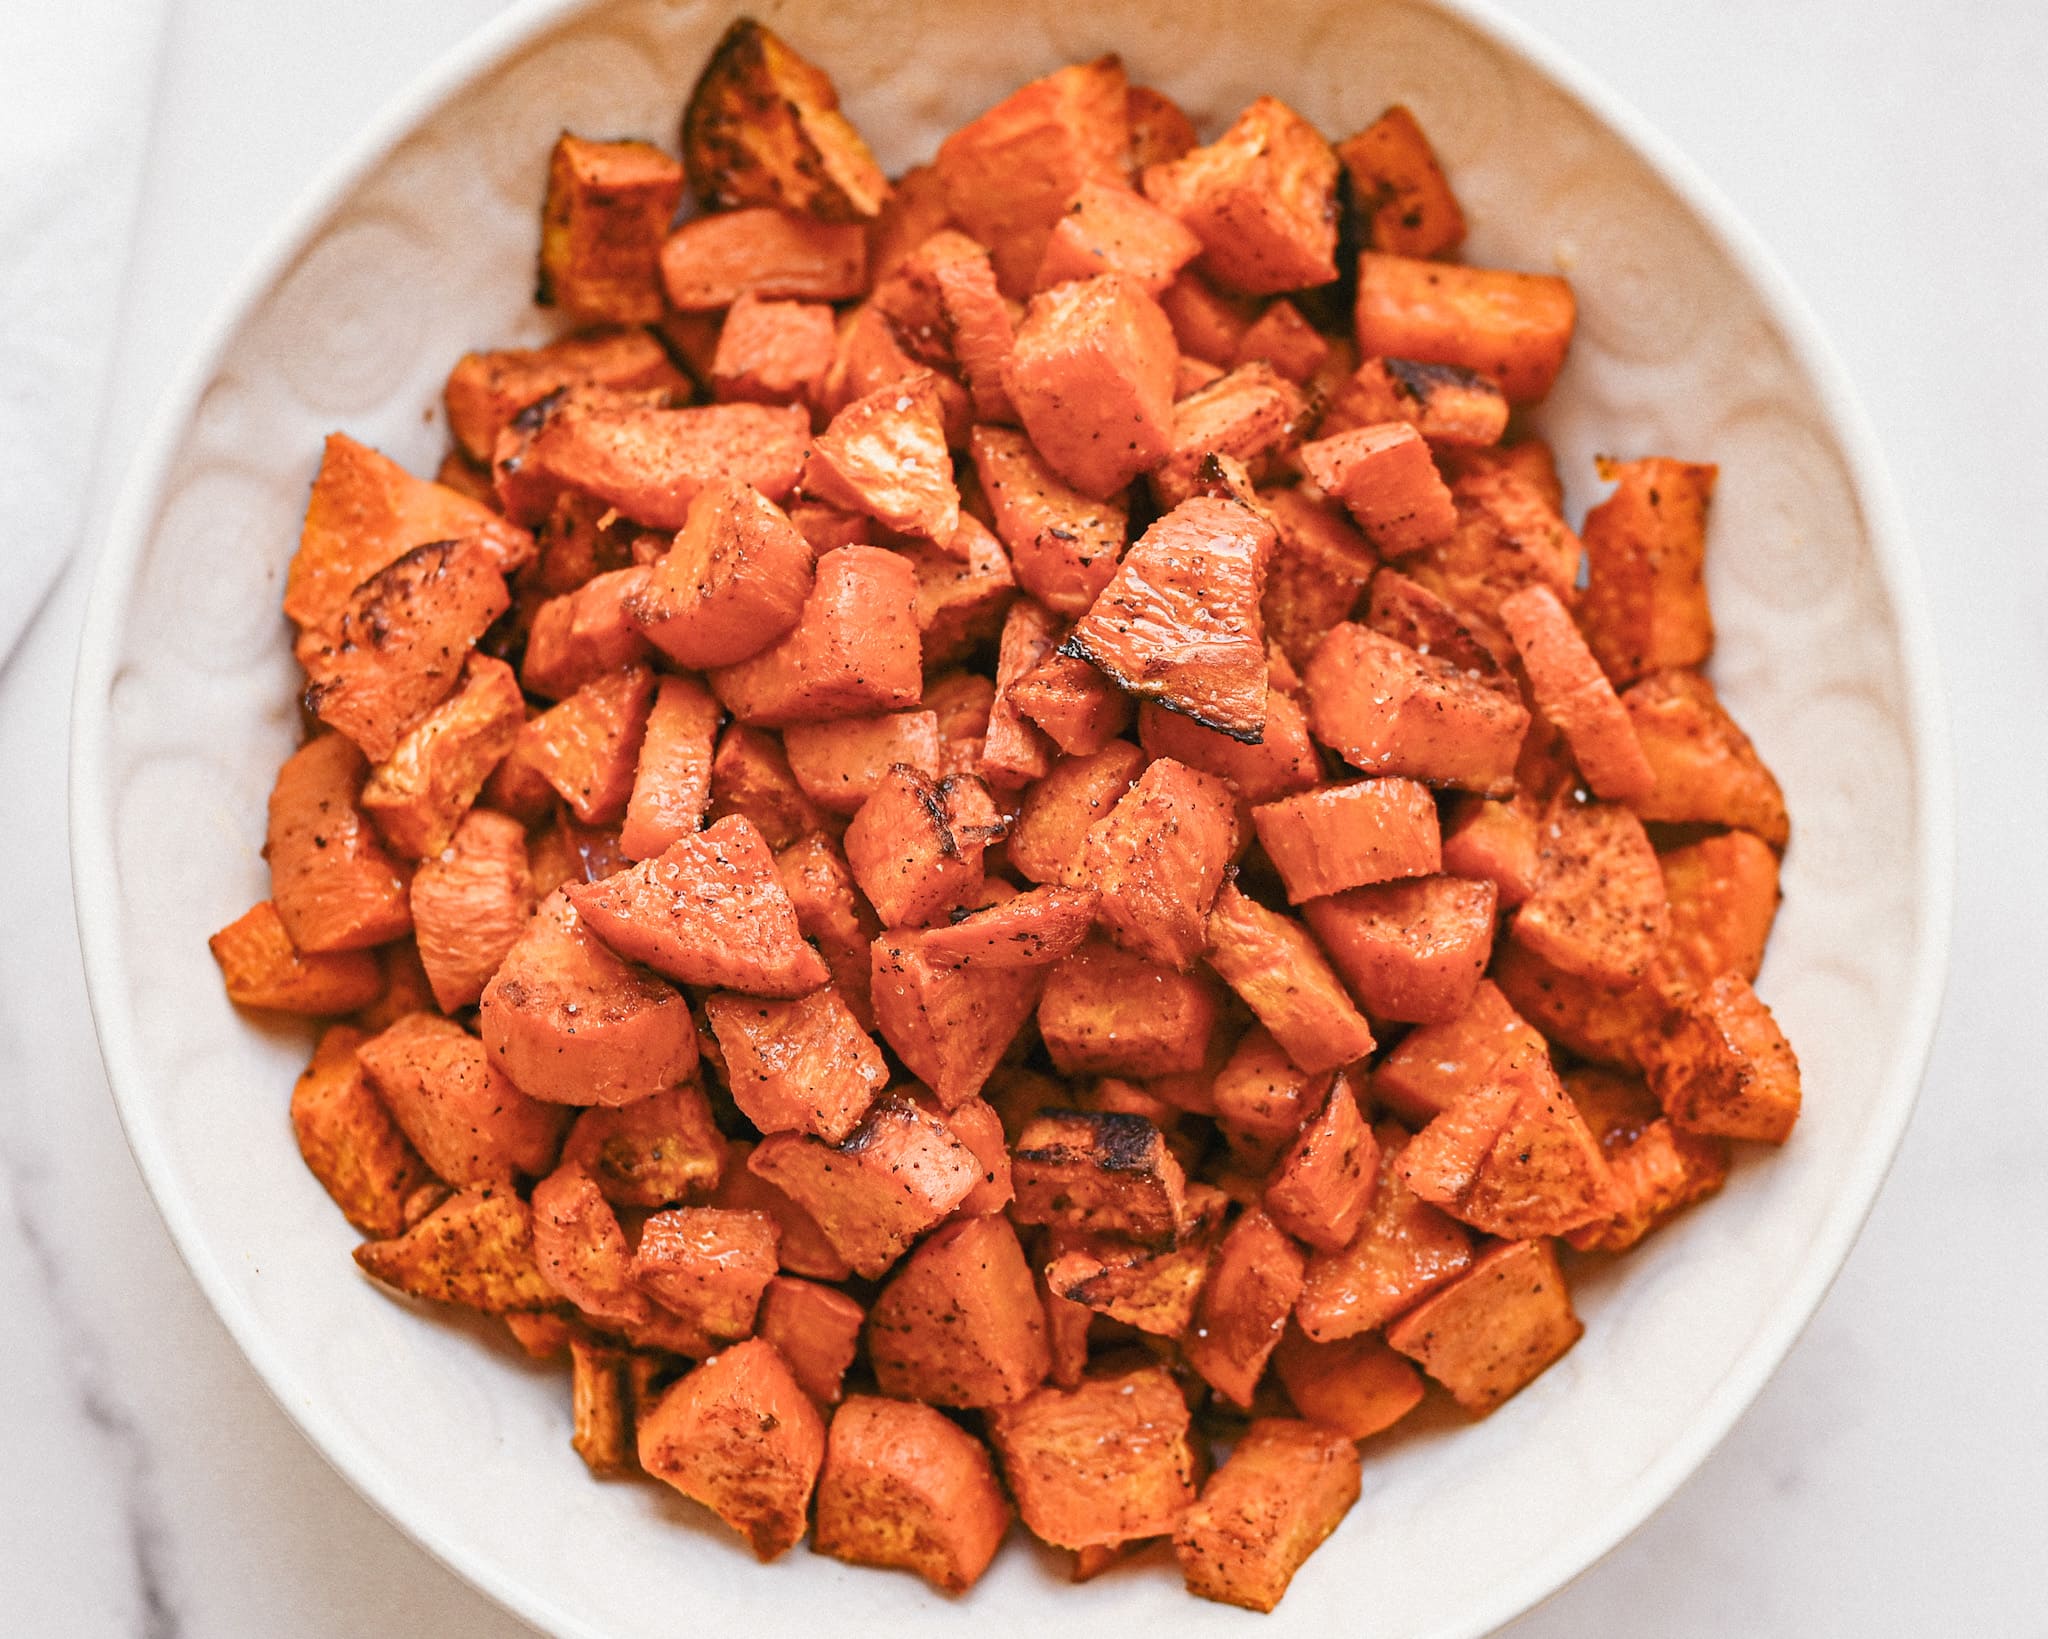 A cropped image of orange sweet potatoes in a white bowl.